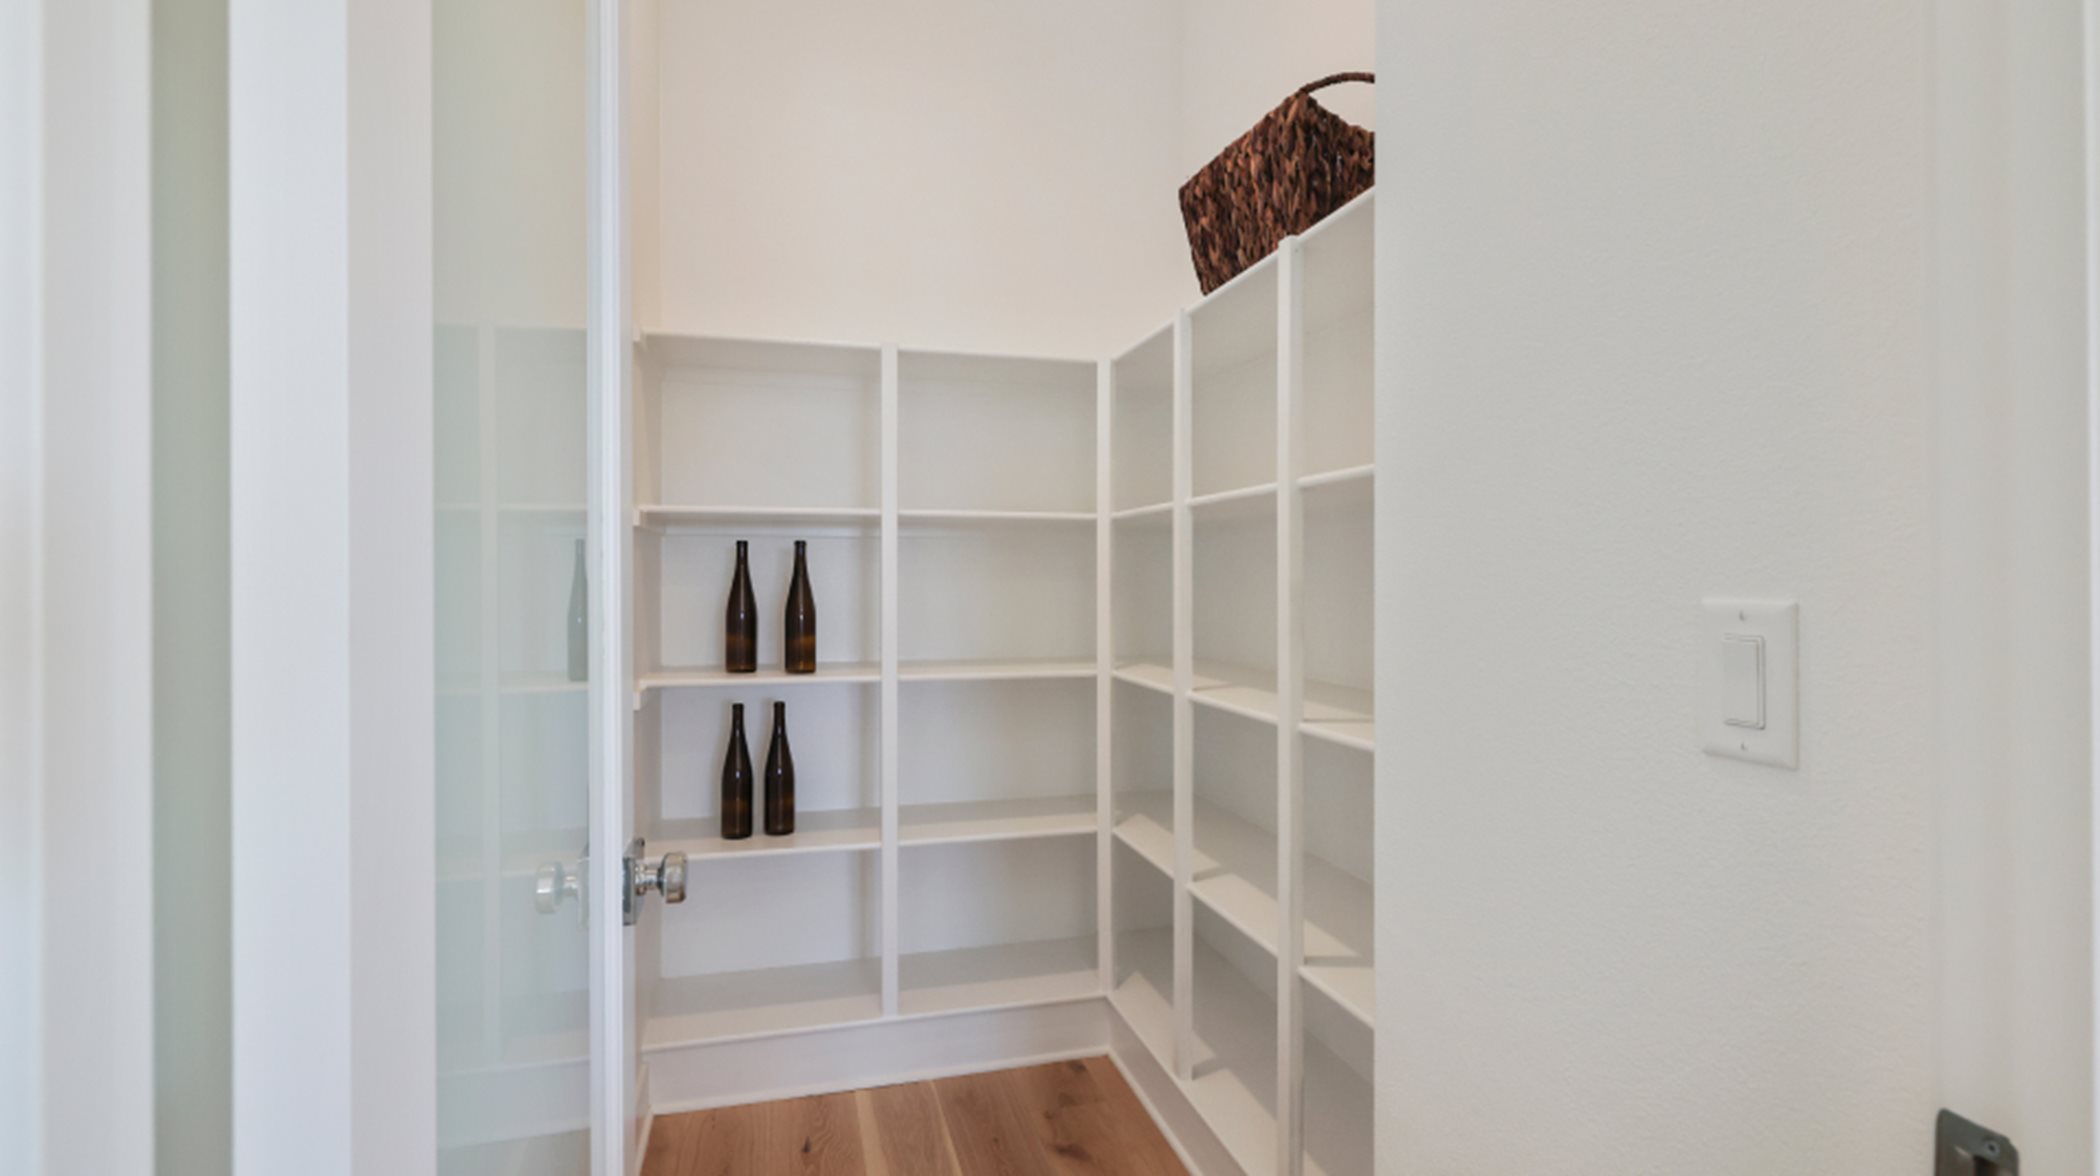 Walk-in pantry with lots of shelving